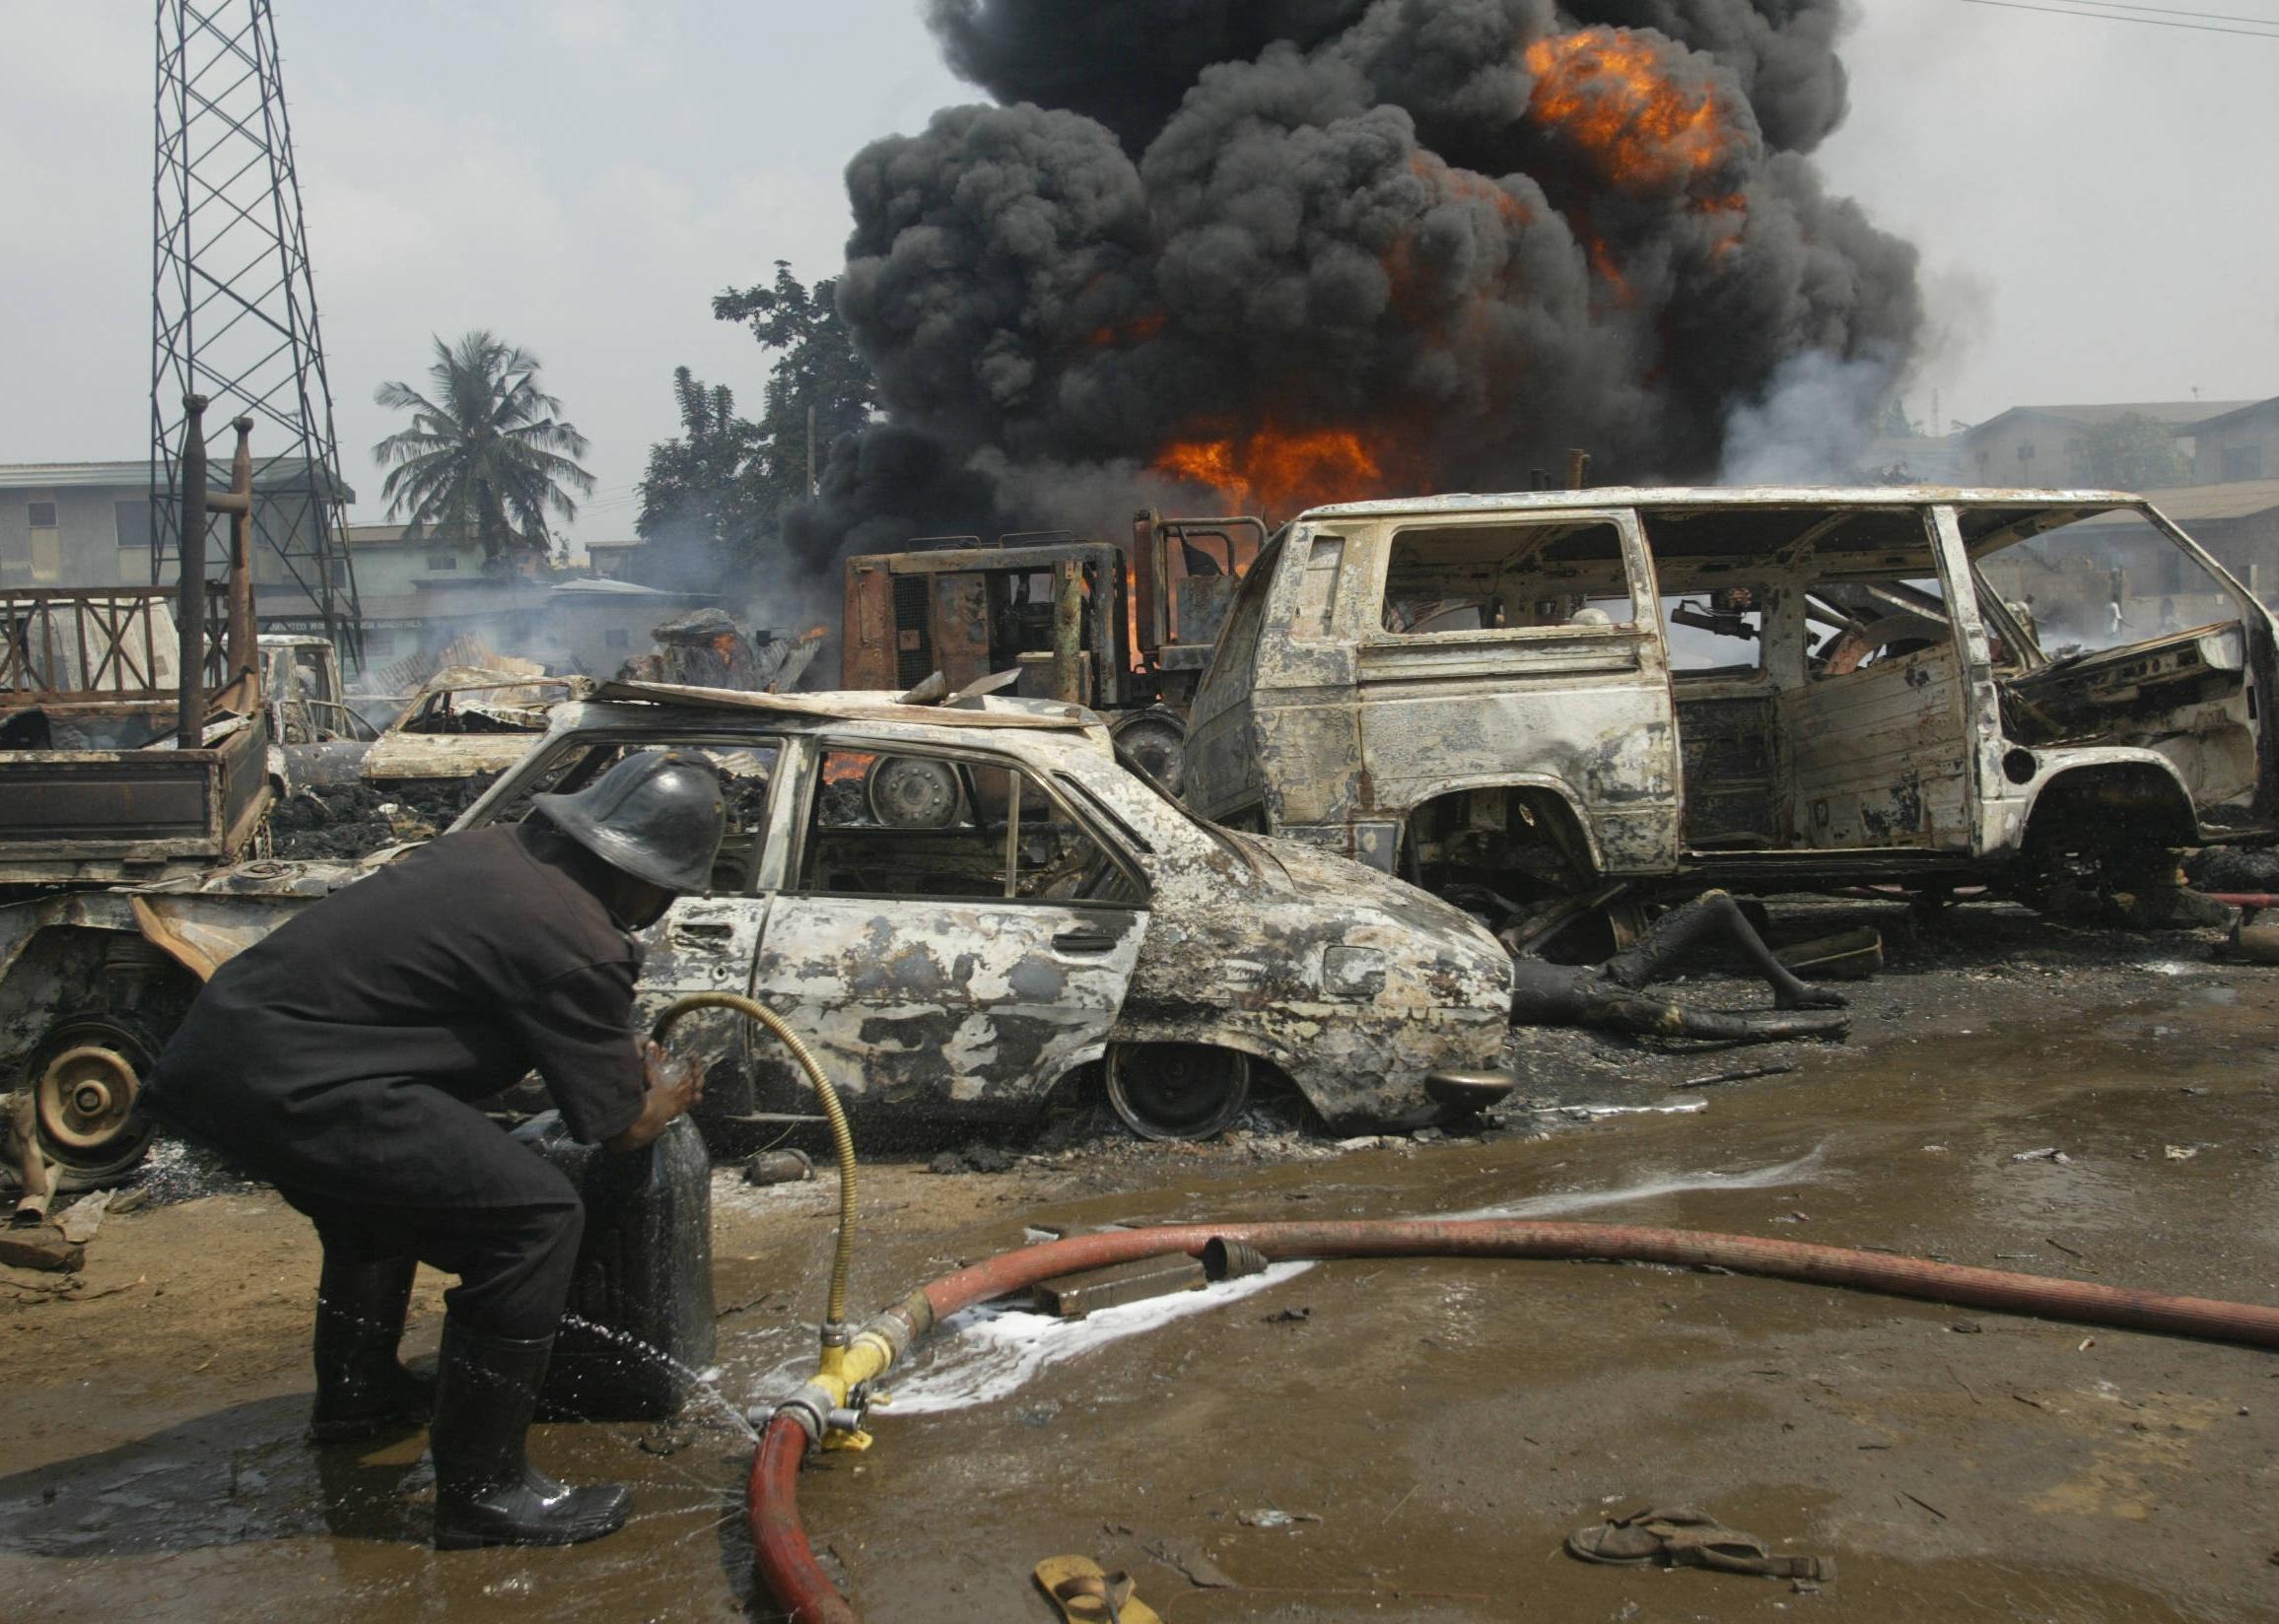 A firefighter tries to put off the fire at the scene of a pipeline explosion at Abule Egba.